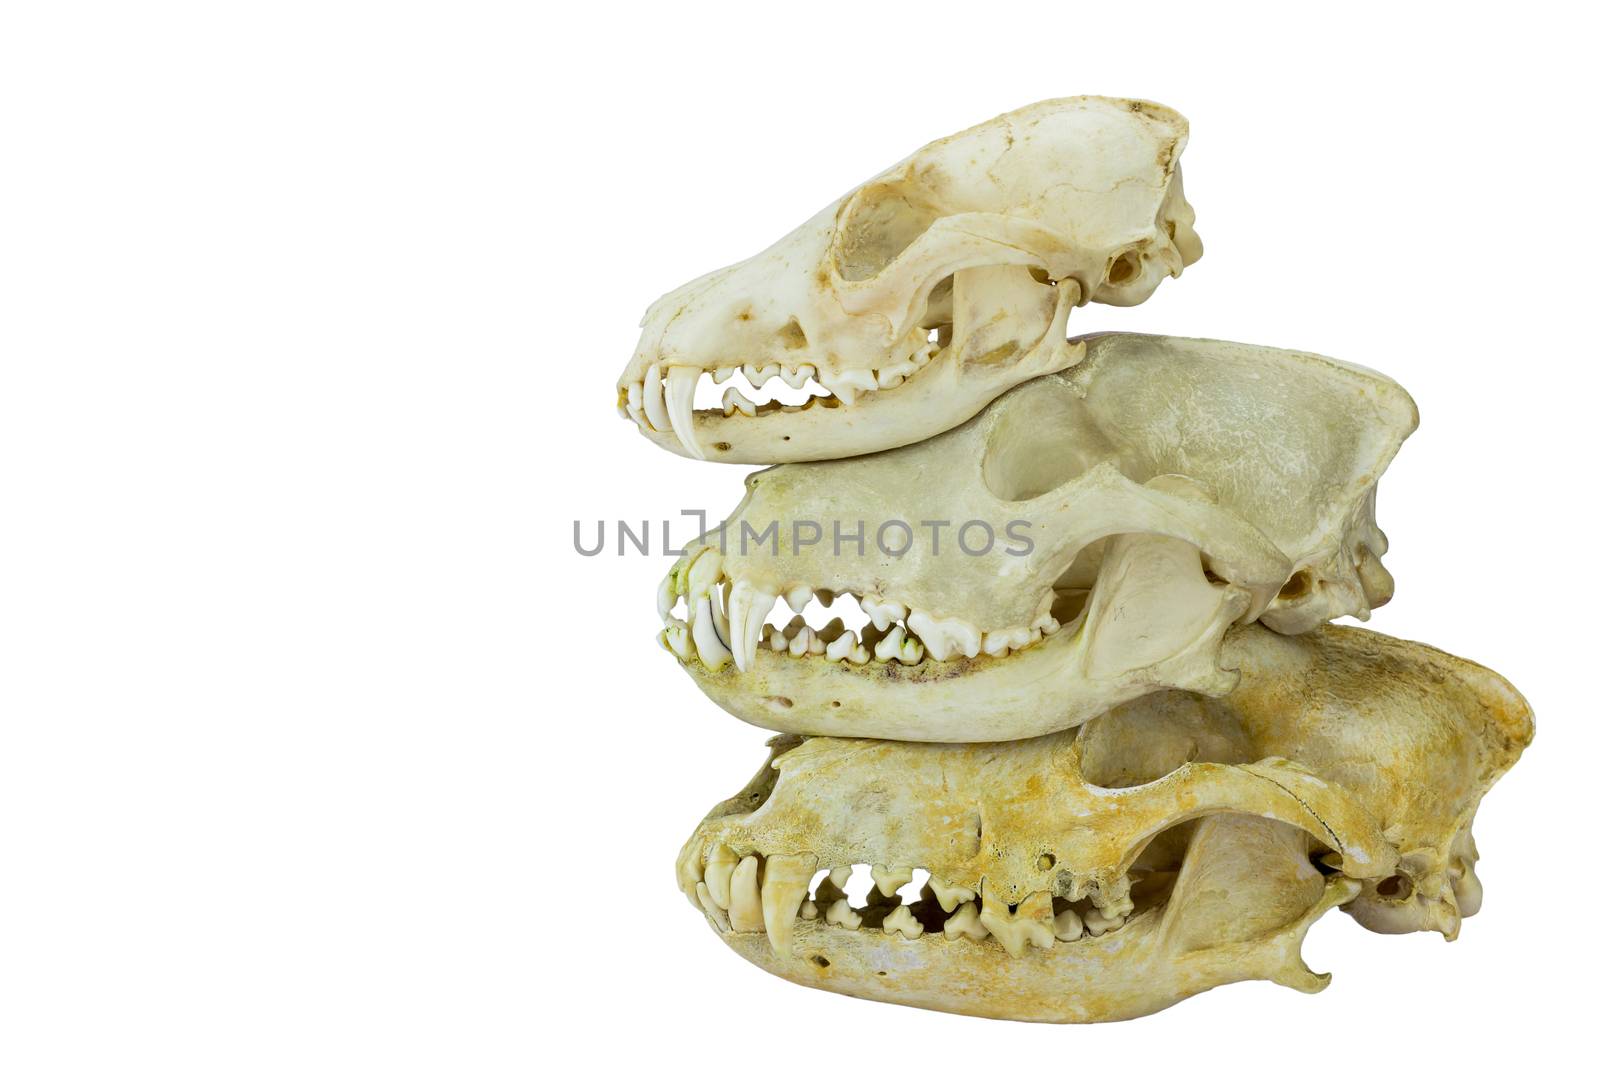 Skulls of fox and dogs on top of each other by BenSchonewille